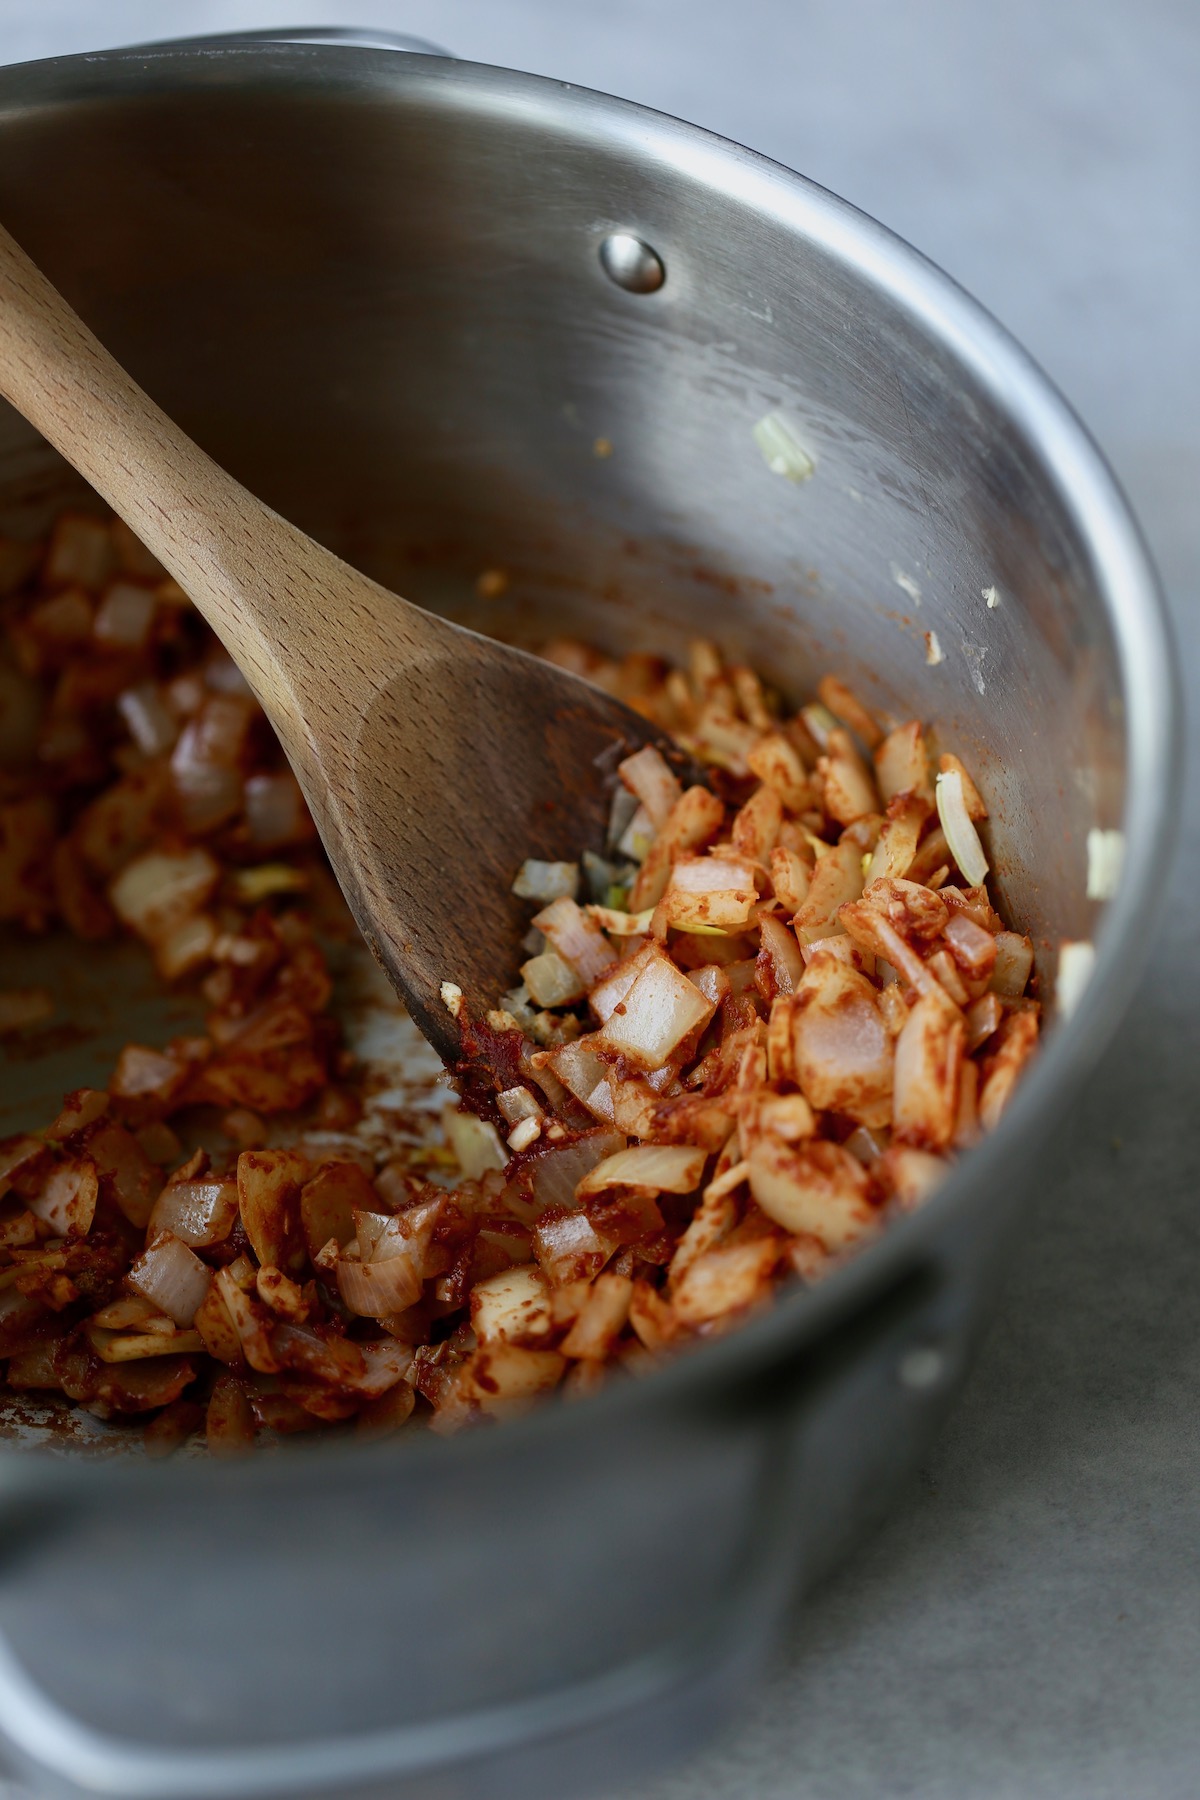 Onions and garlic coated in tomato paste and spices being stirred with a wooden spoon in a silver pot.